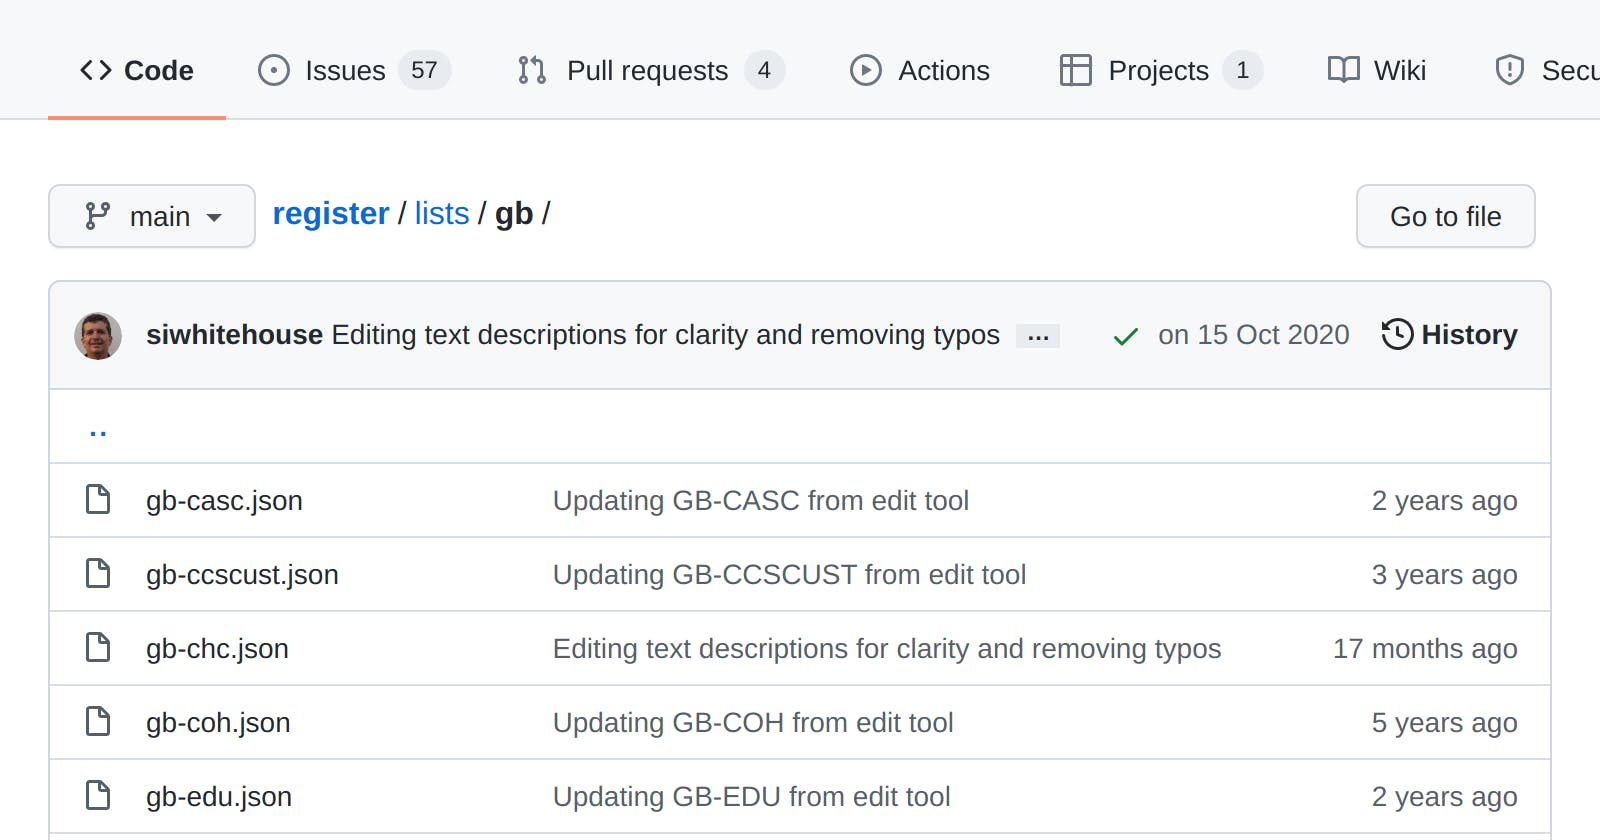 DataTig helps you crowd source data in a git repository